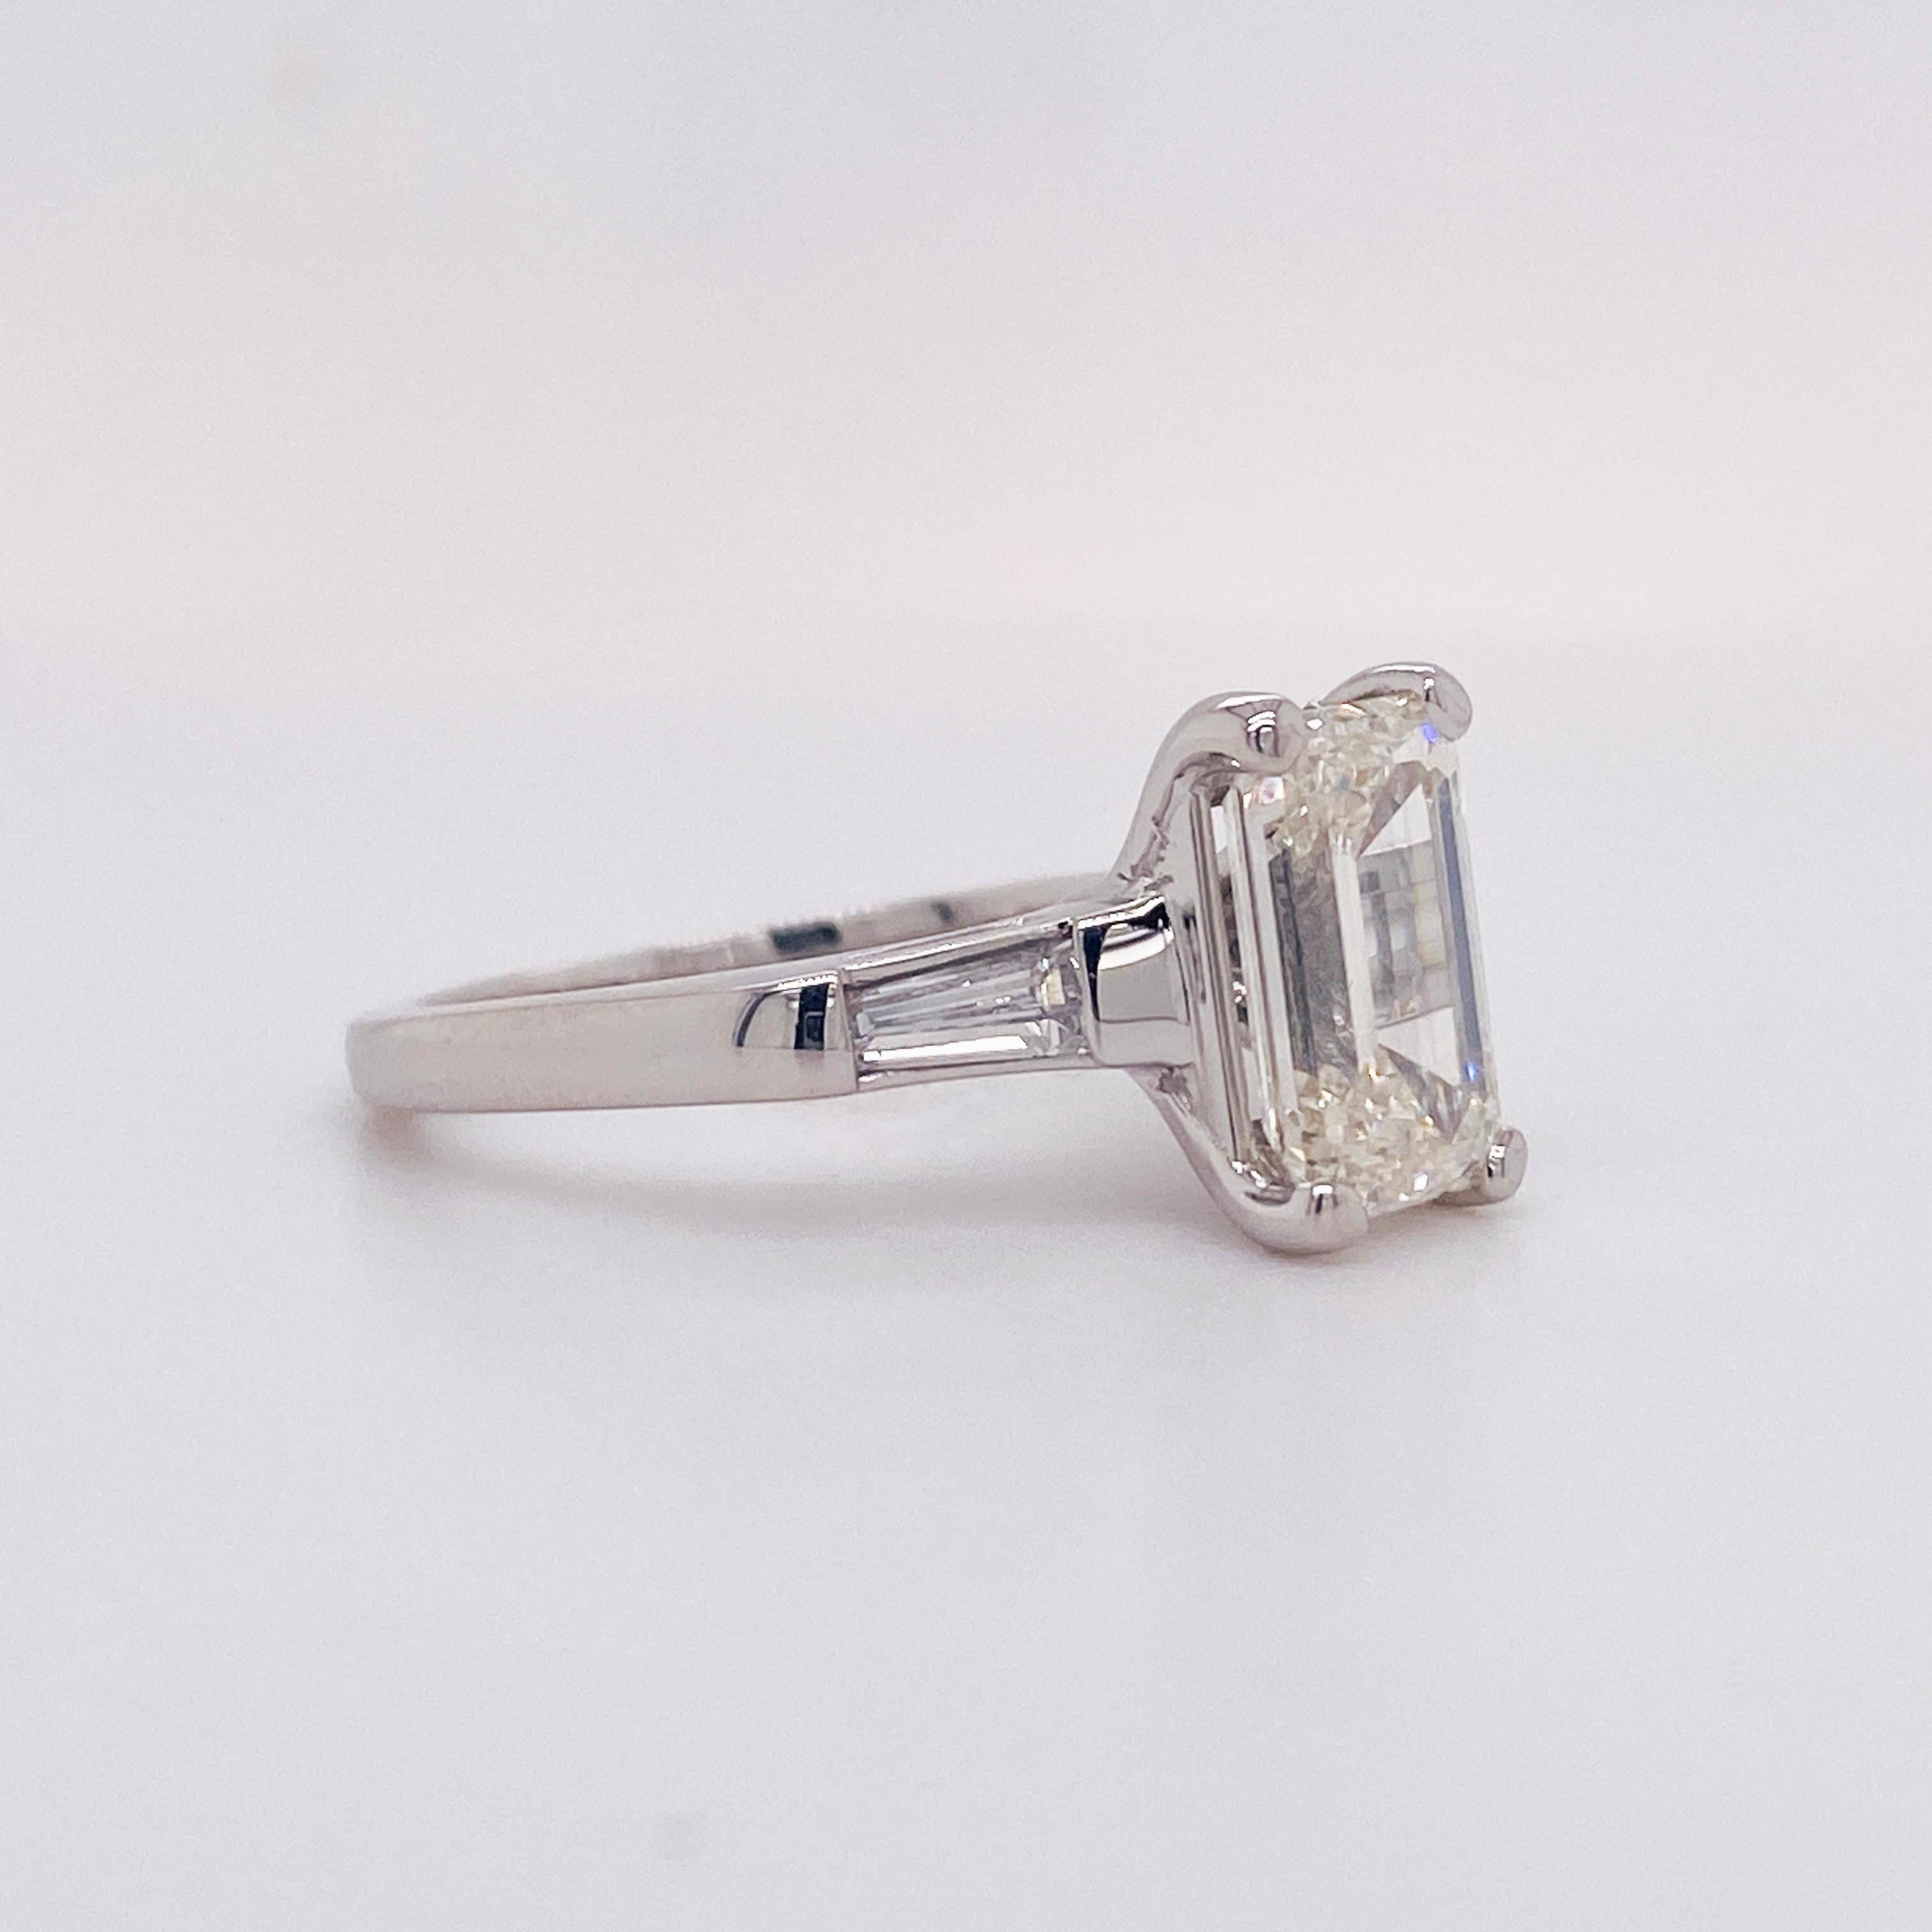 For Sale:  Emerald Cut Diamond Platinum Ring 2.50 Carats Flanked with Baguette Dias Lv 4